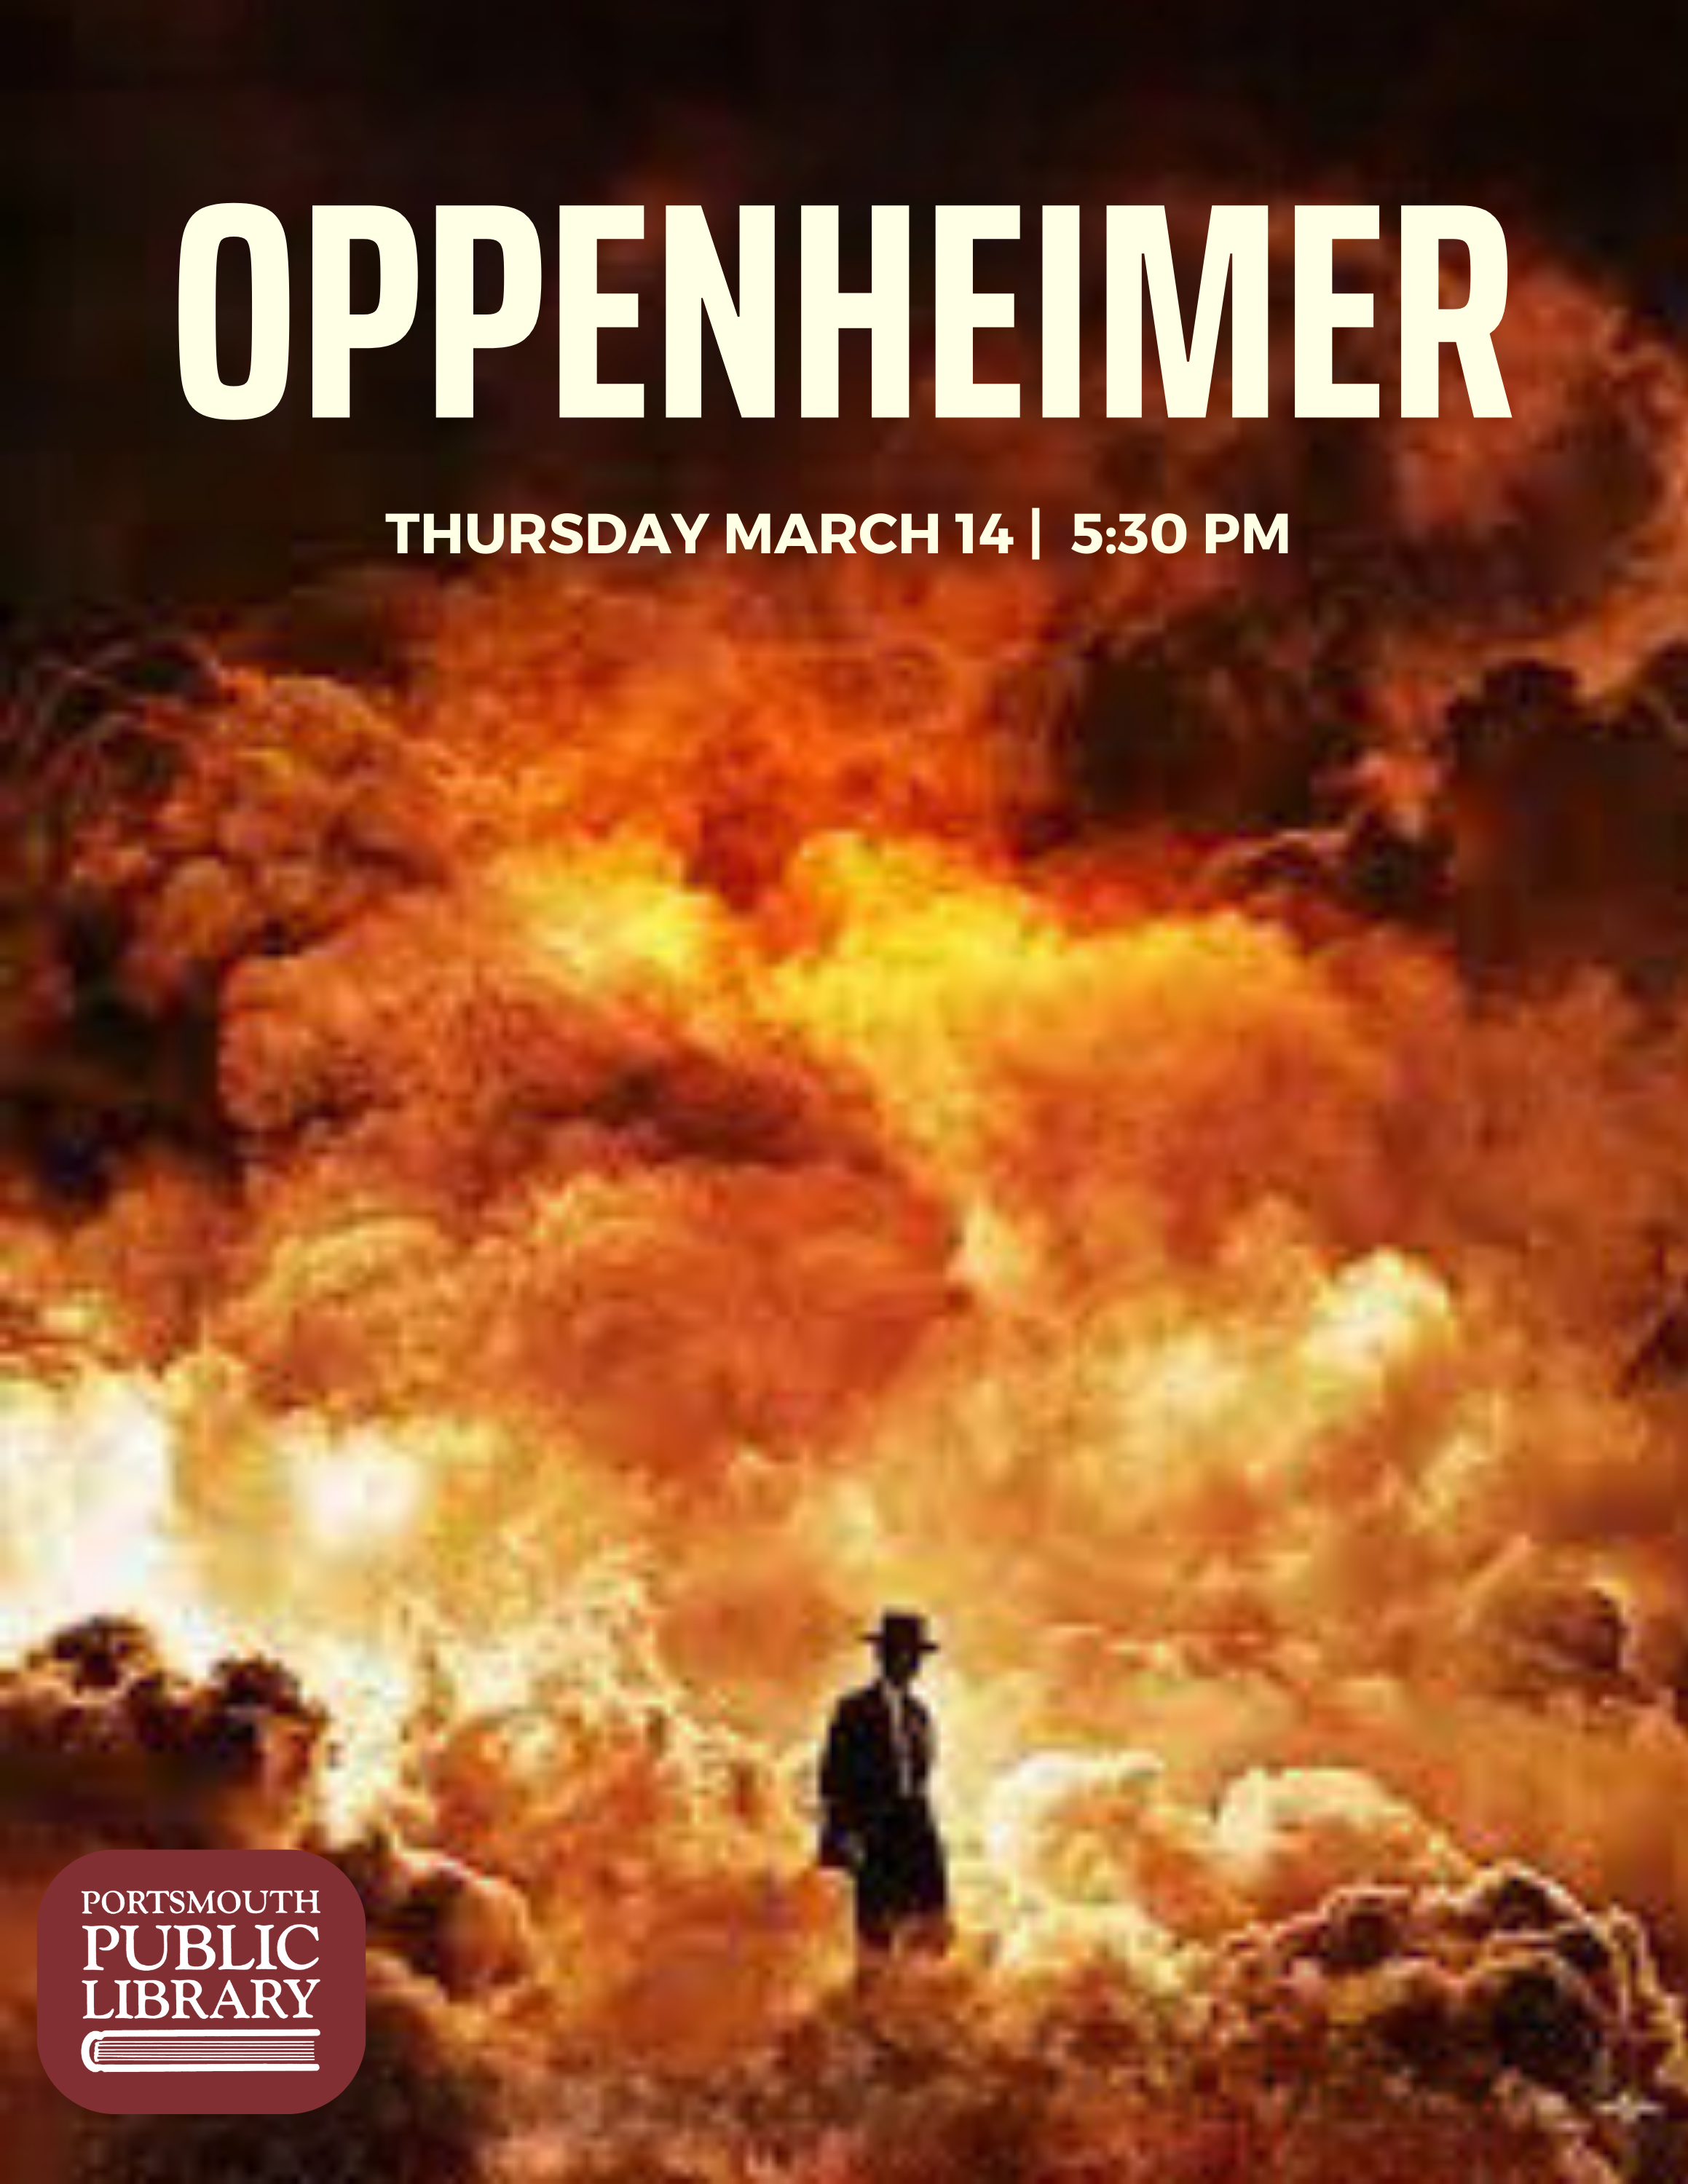 Atomic bomb detonates with man in hat standing in front of mushroom cloud Oppenheimer March 14 5:30 PM